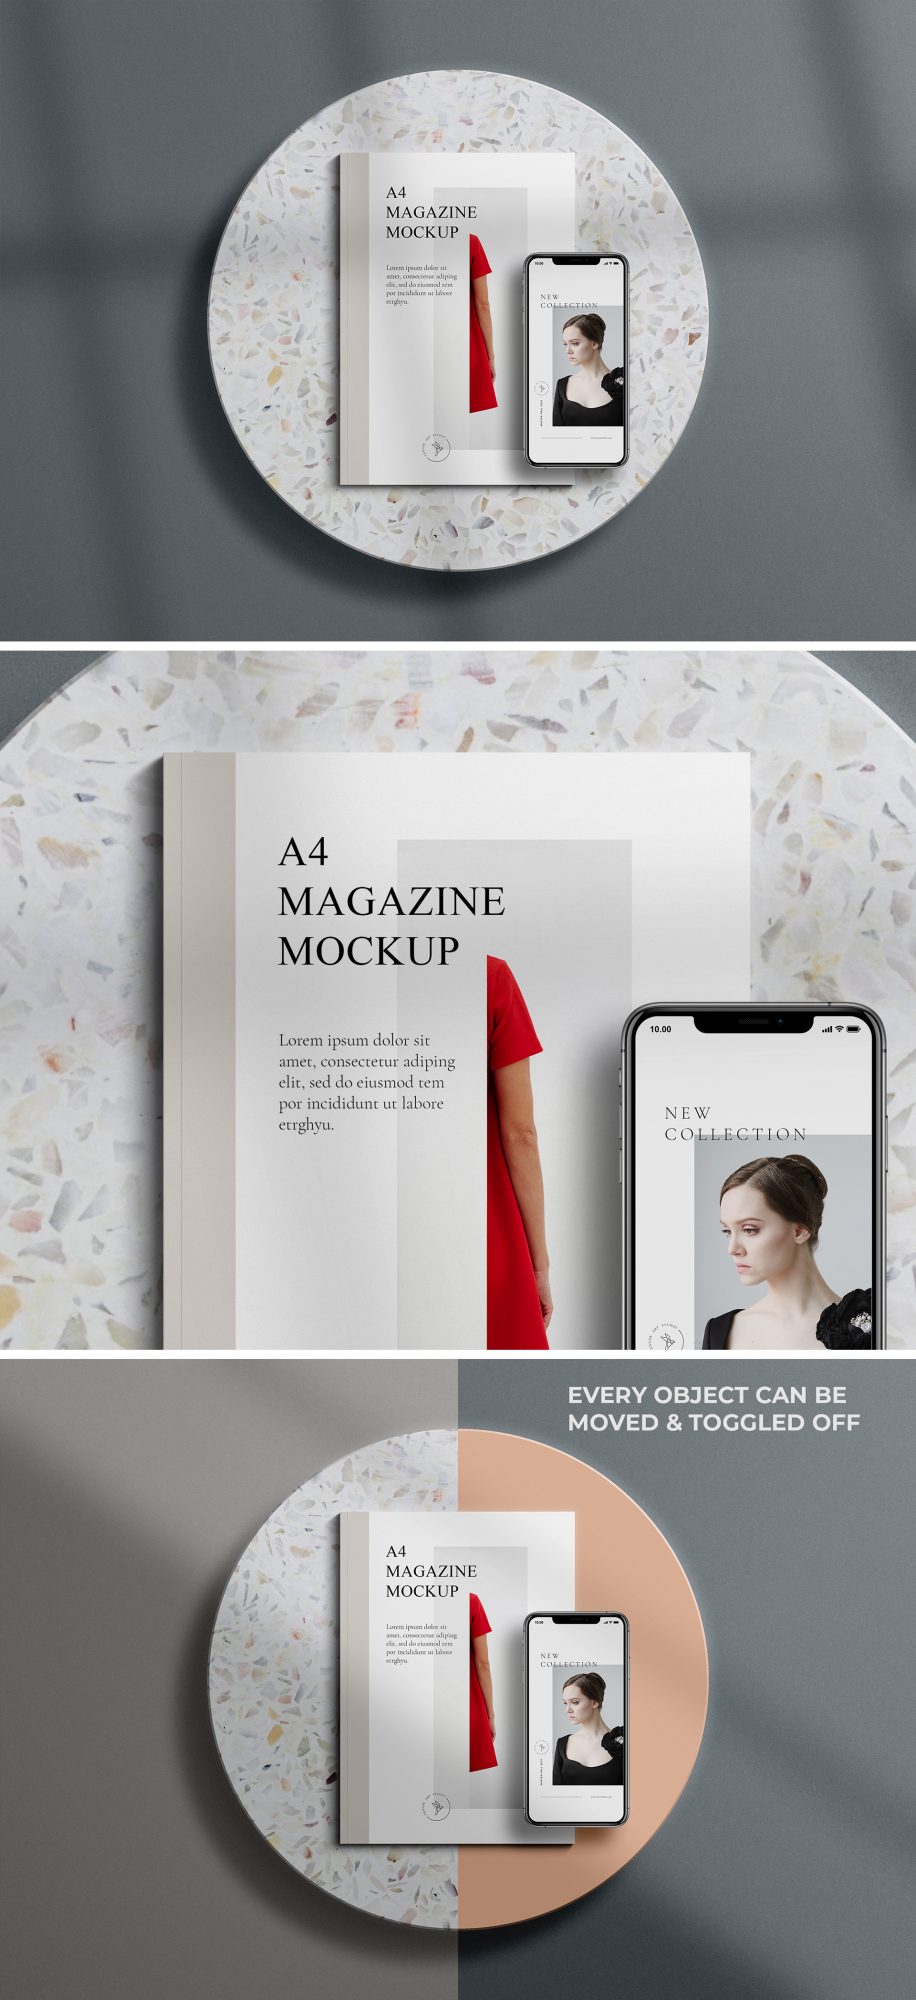 A4 Magazine and iPhone Mockup